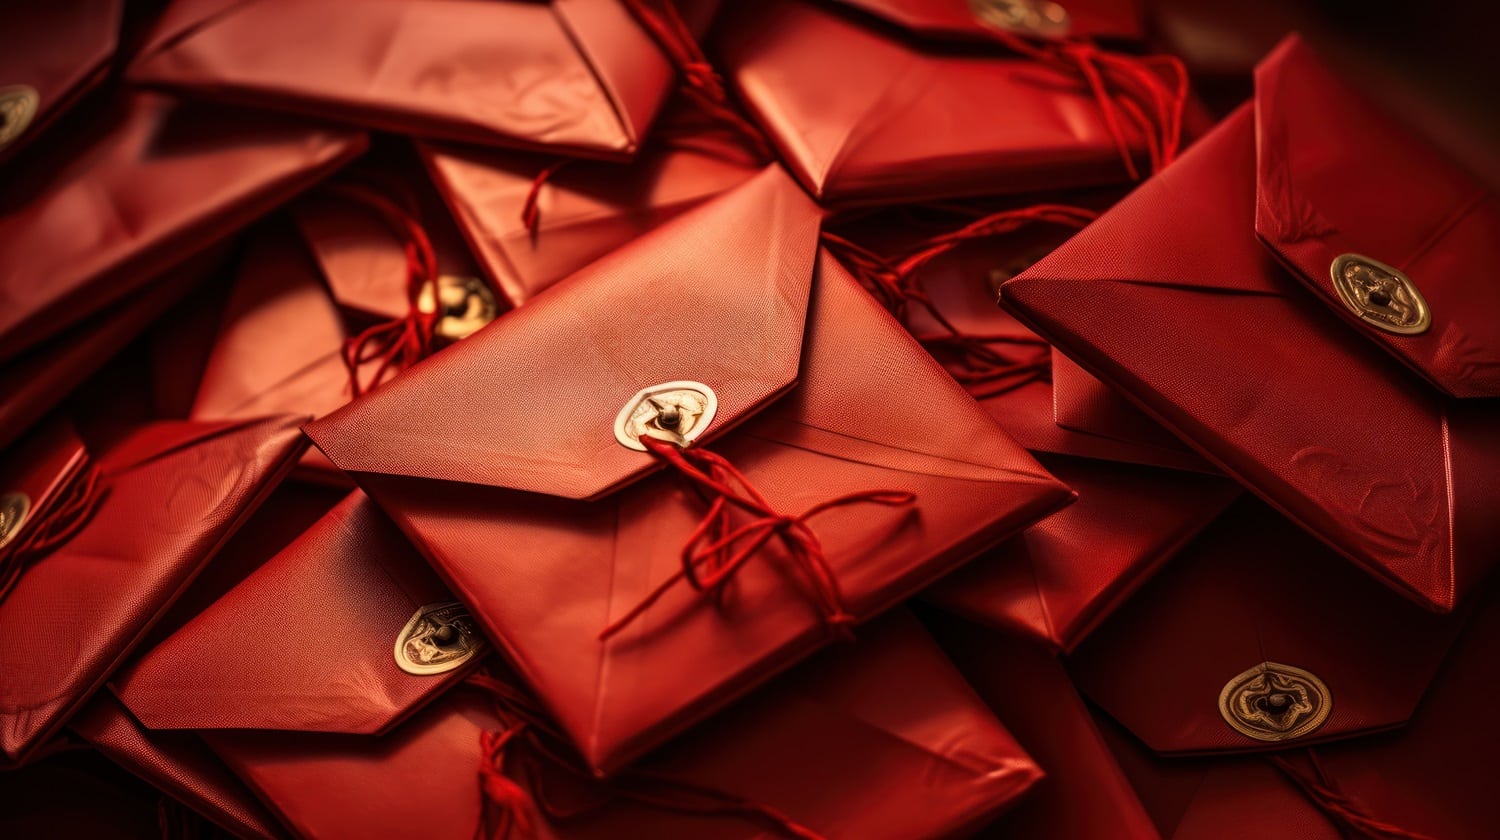 A stack of red envelopes, of the type usually given out during Chinese New Year celebrations.